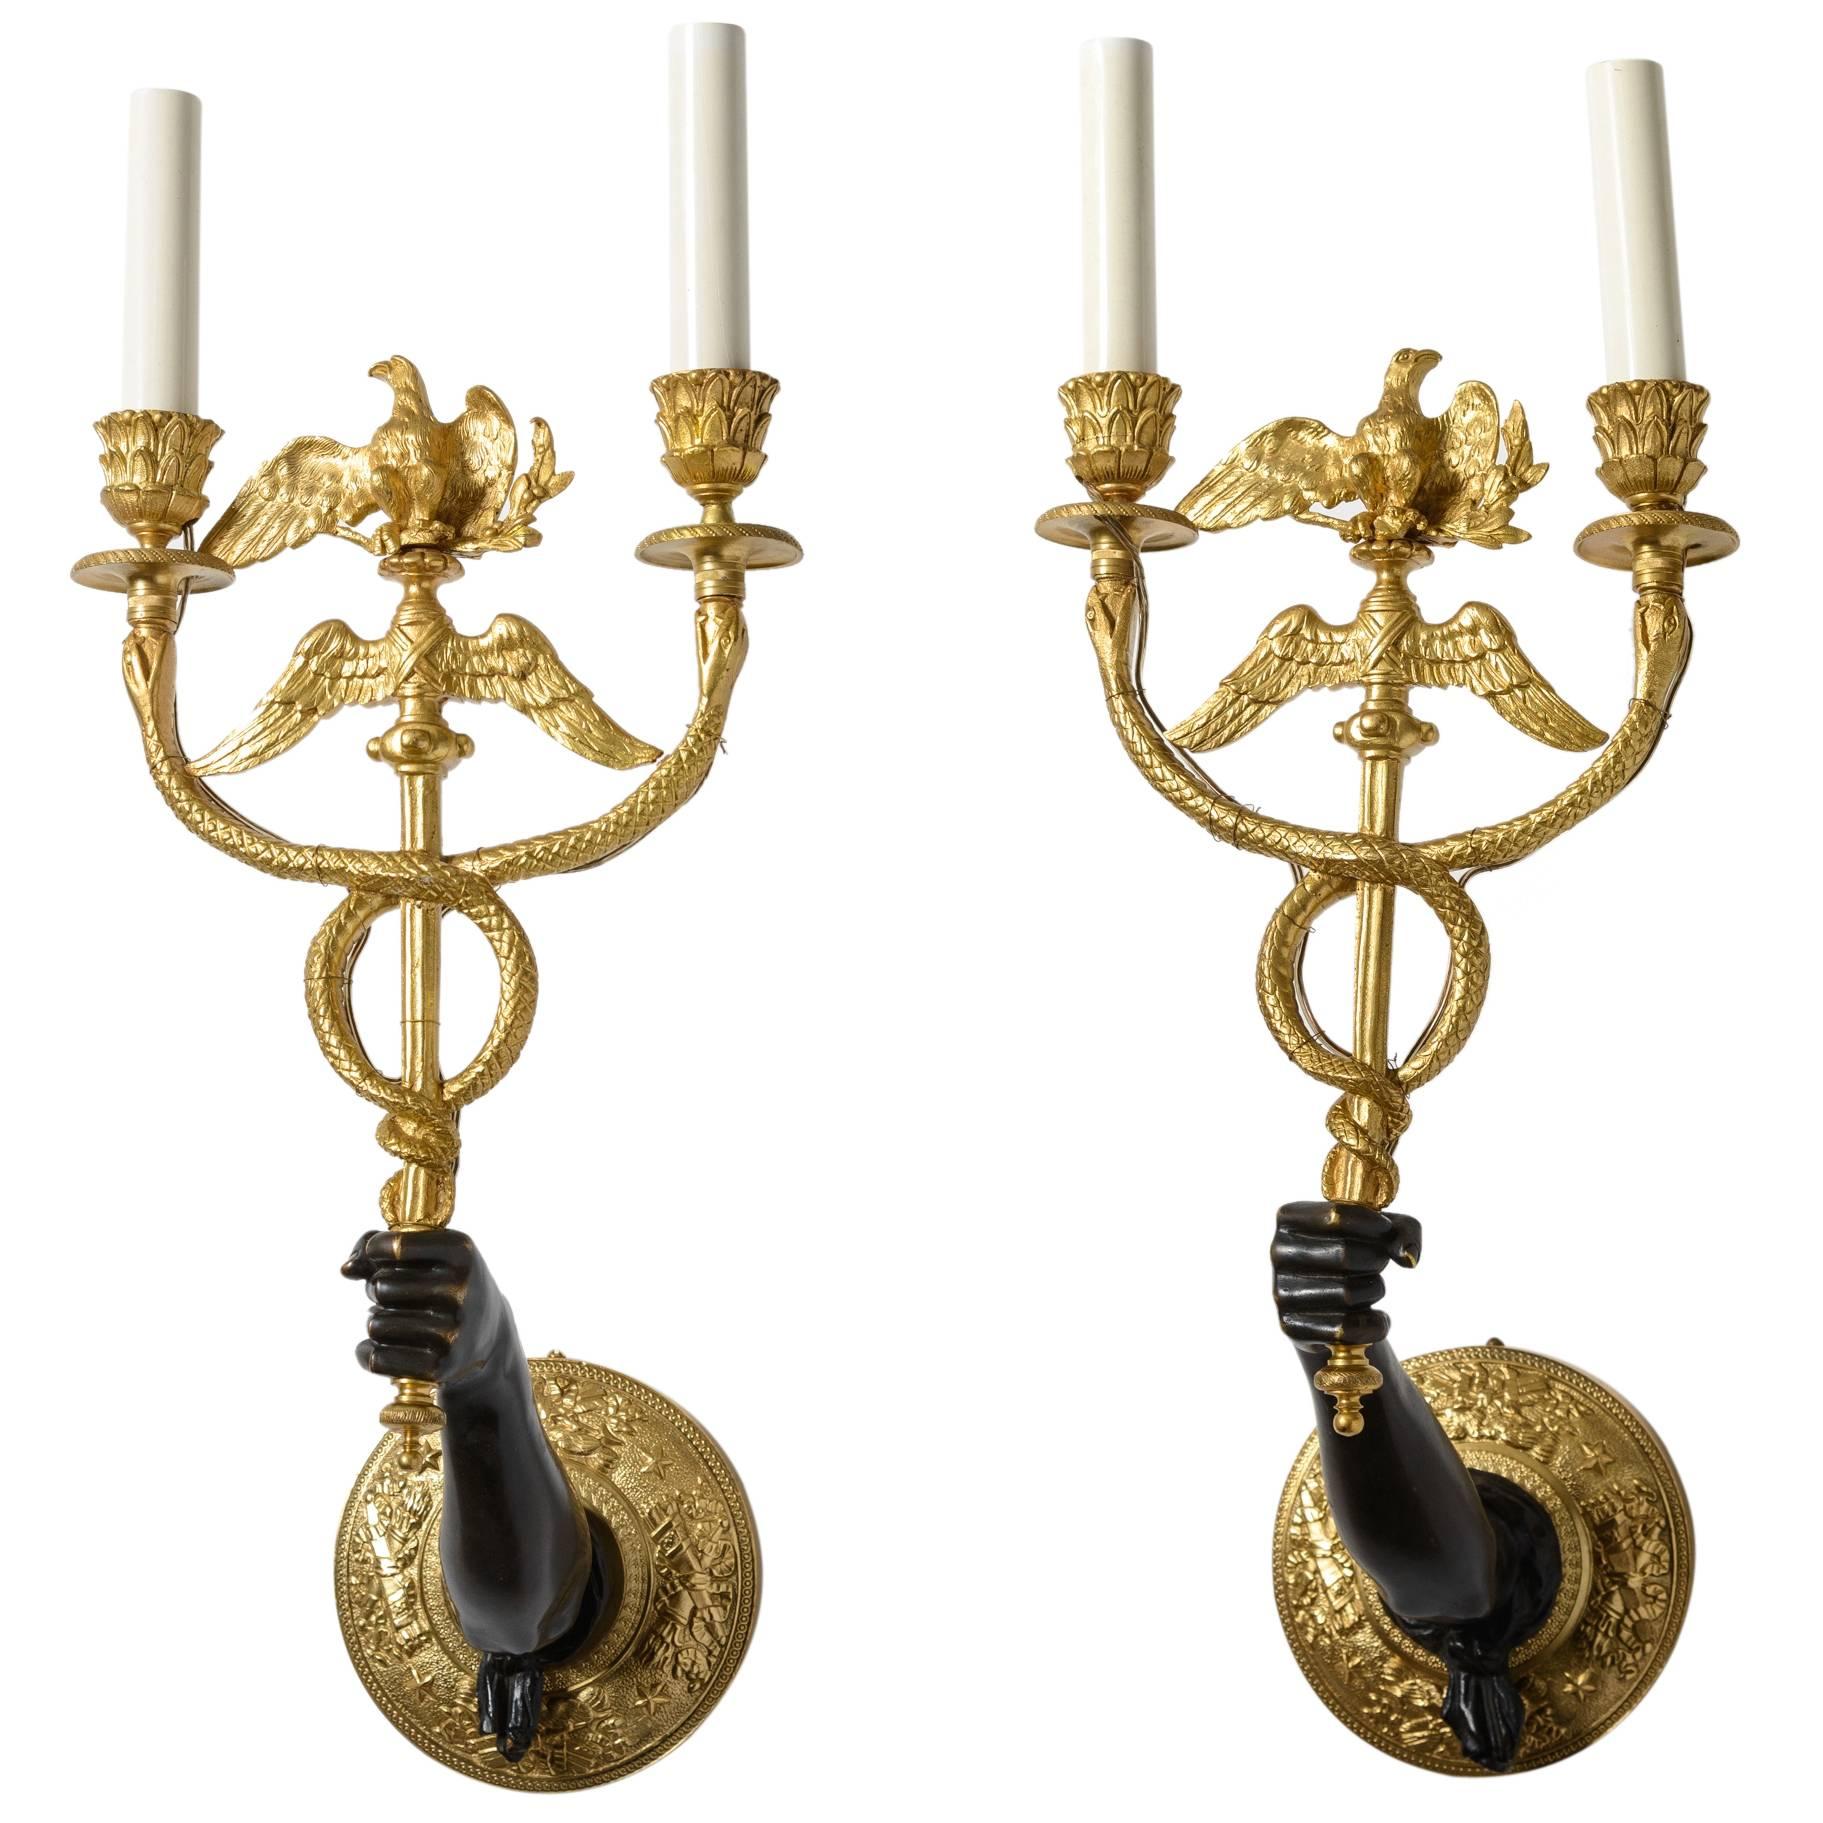 Pair of 19th Century French Empire Style Bronze Wall-Mount Candelabra/Sconces